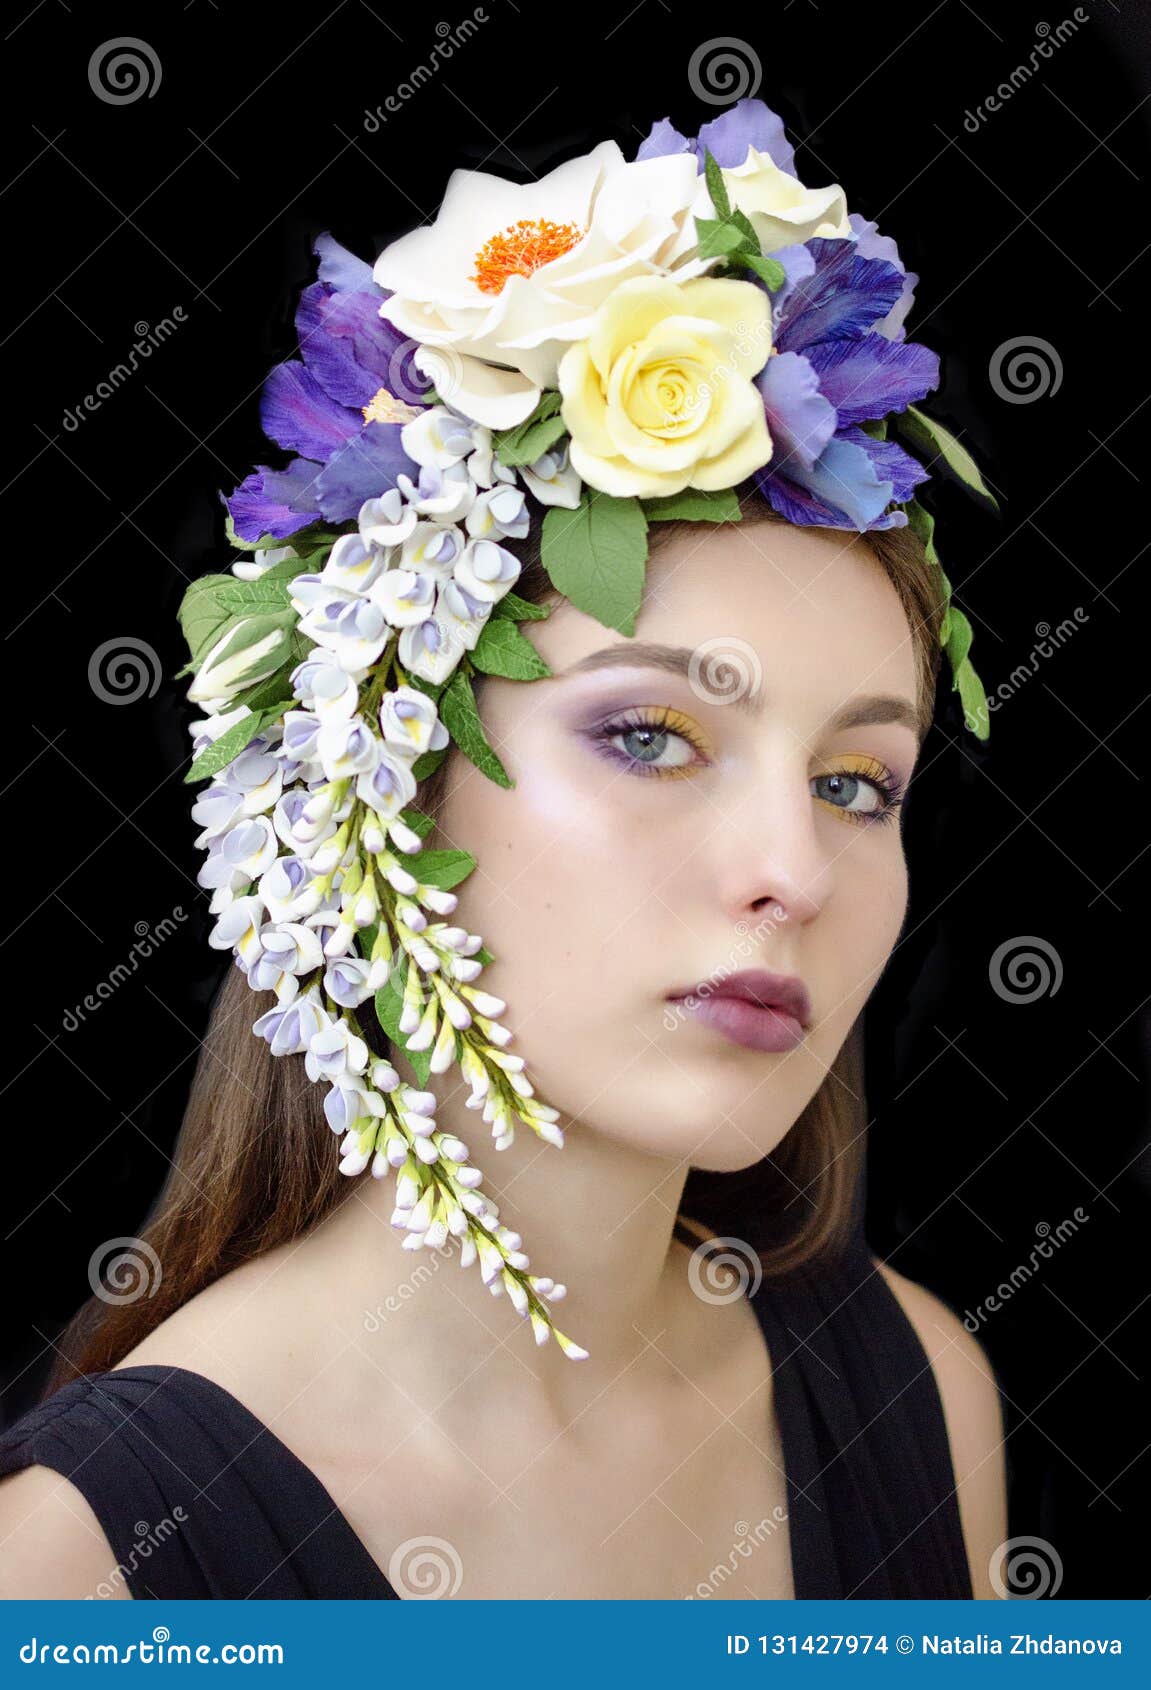 A girl in a flower crown stock photo. Image of occasions - 131427974